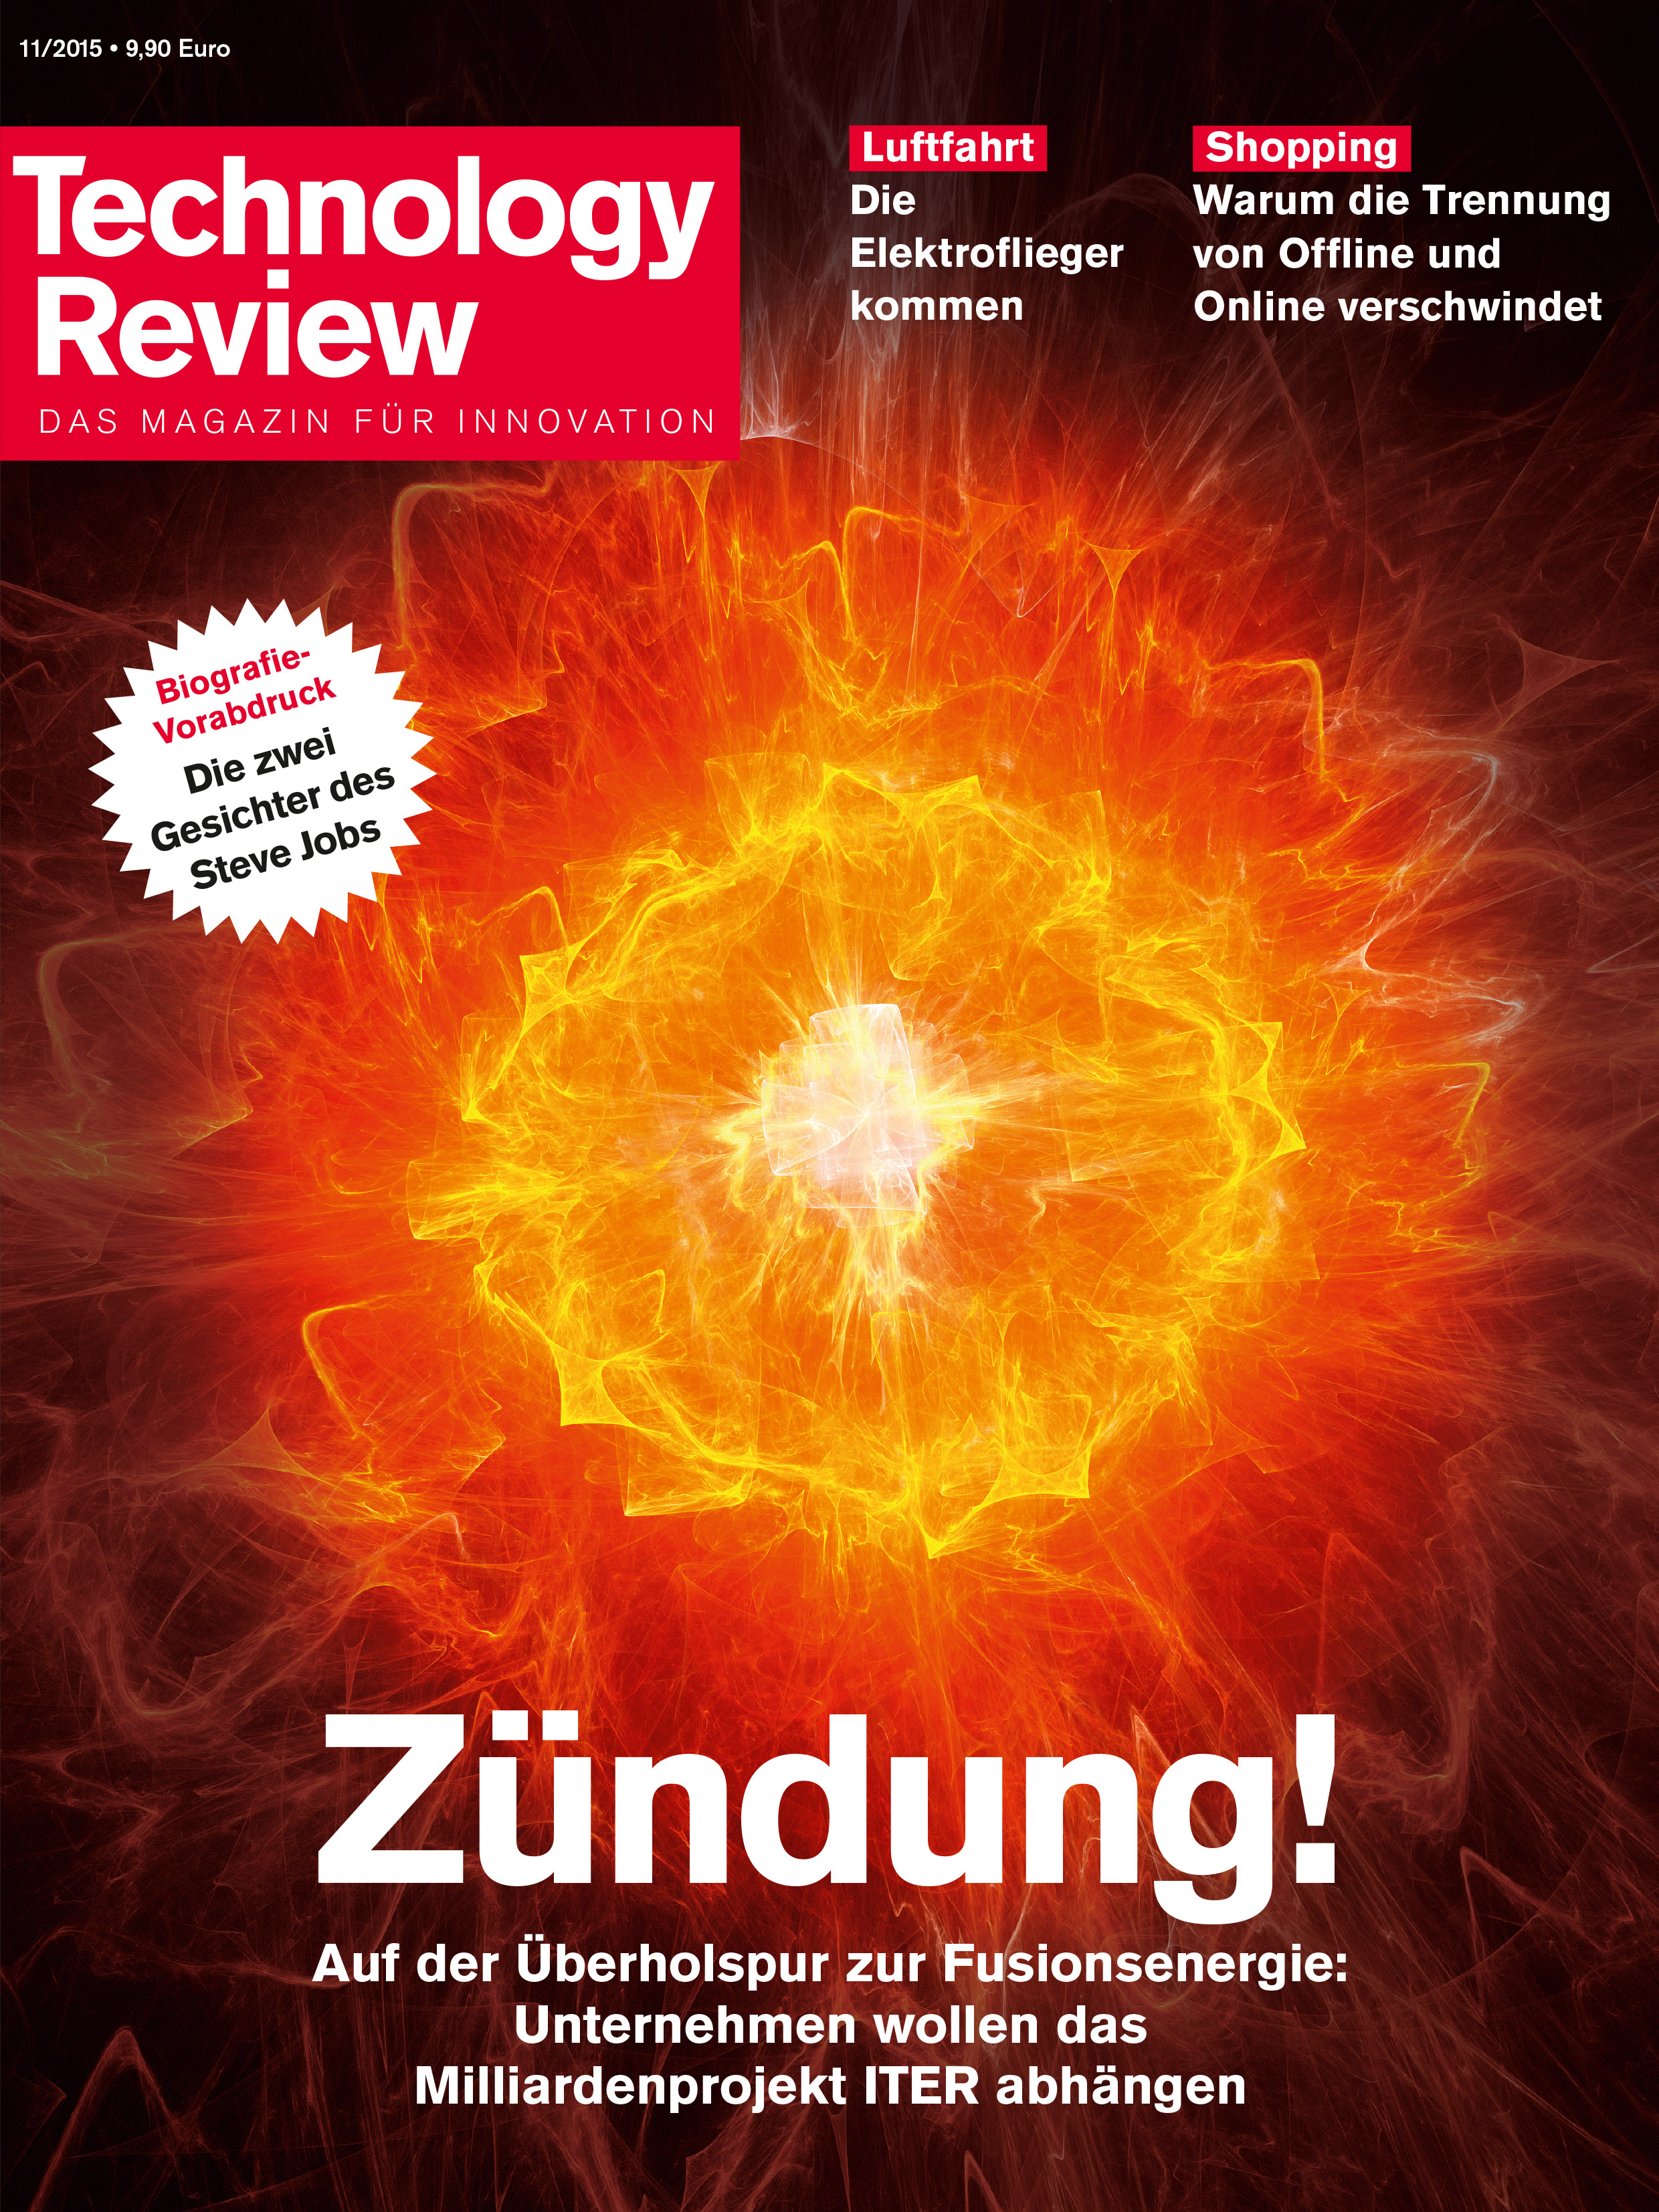 Technology Review 11/2015